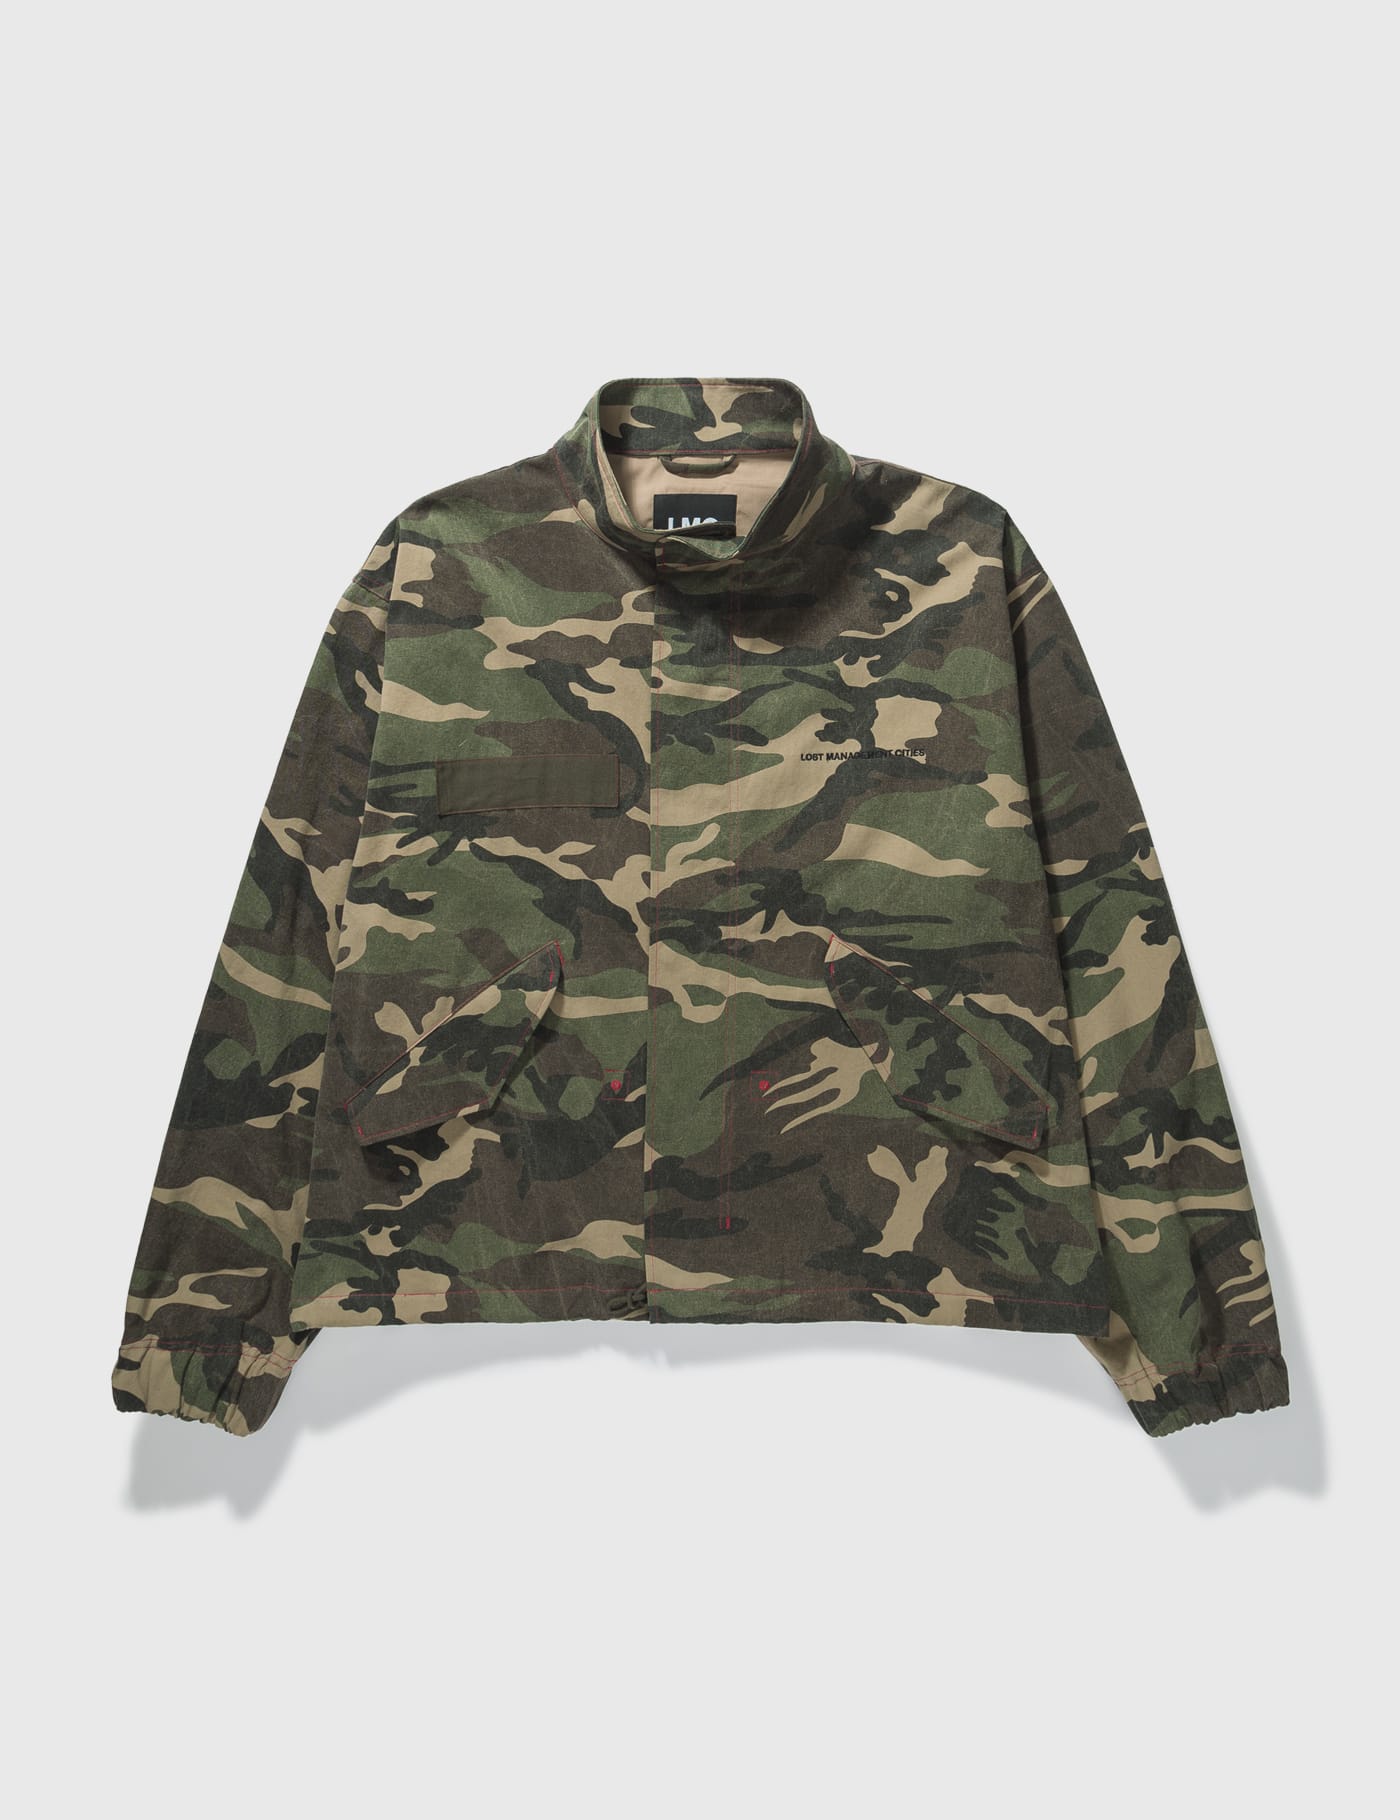 LMC - Cropped M-65 Jacket | HBX - Globally Curated Fashion and